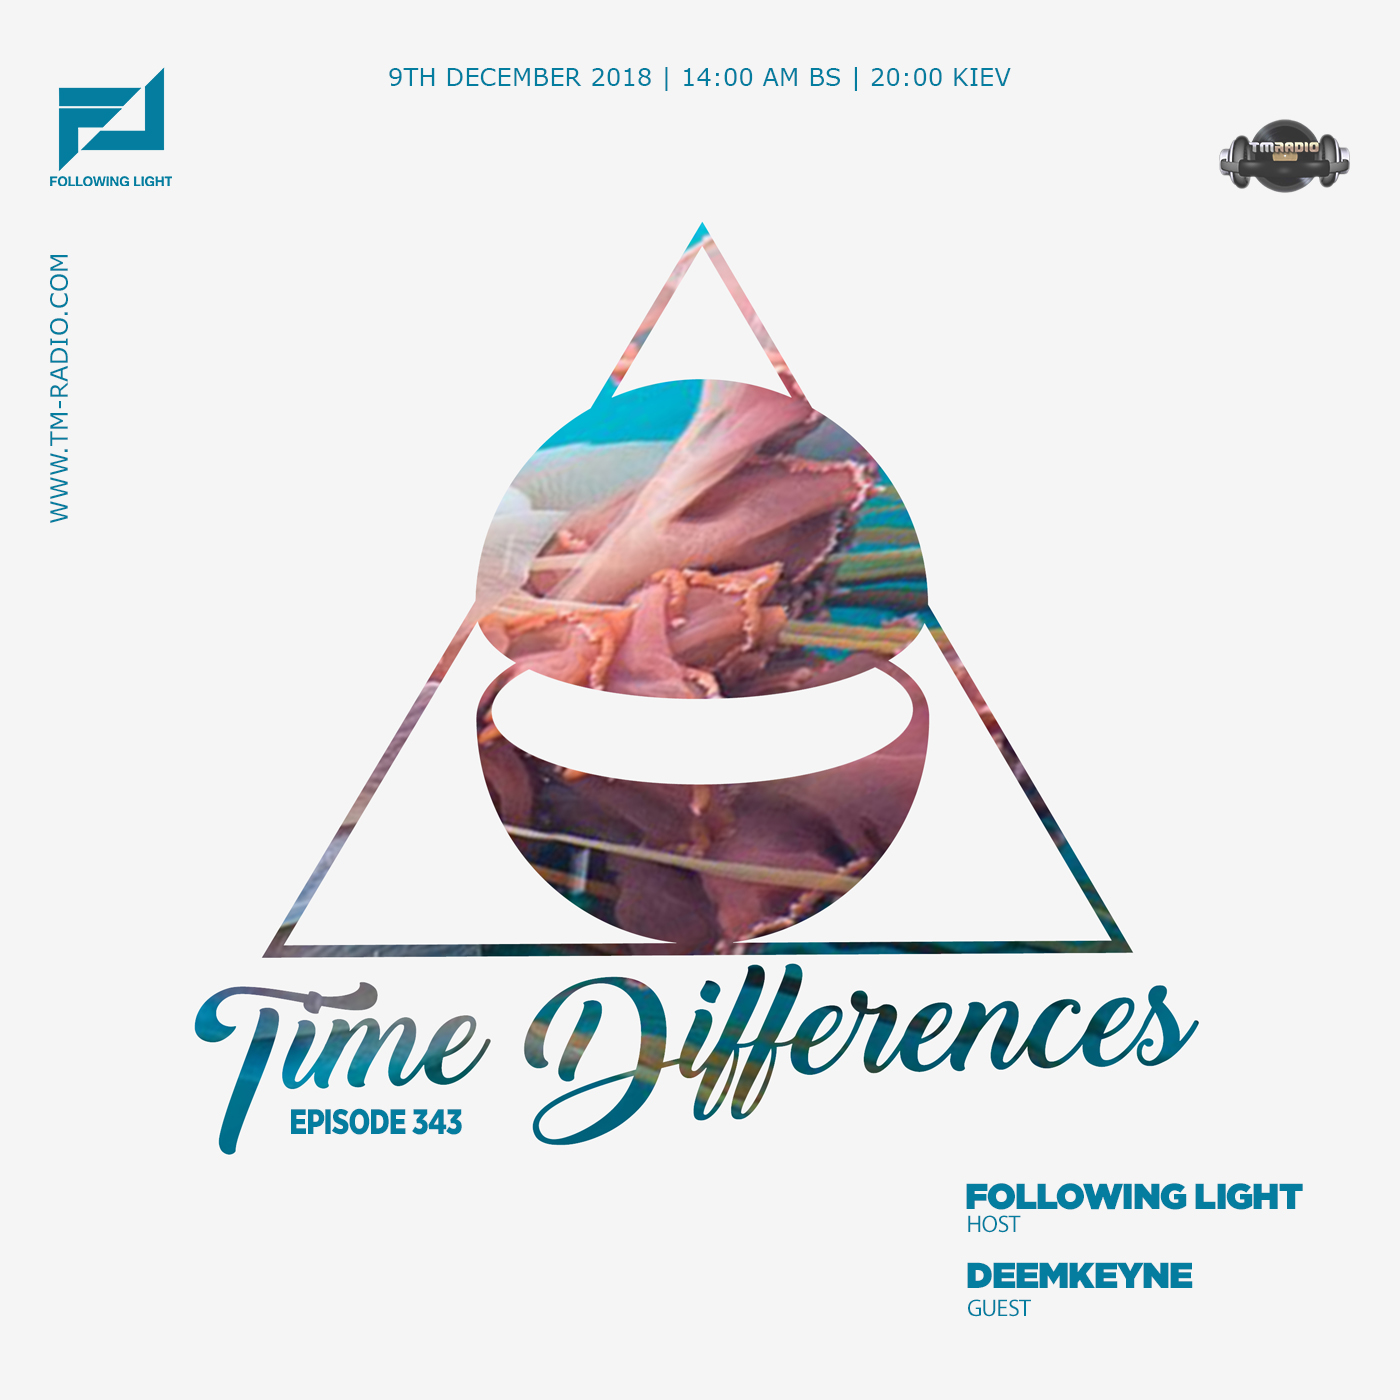 Time Differences :: Episode 343, with host Following Light and guest Deemkeyne (aired on December 9th, 2018) banner logo